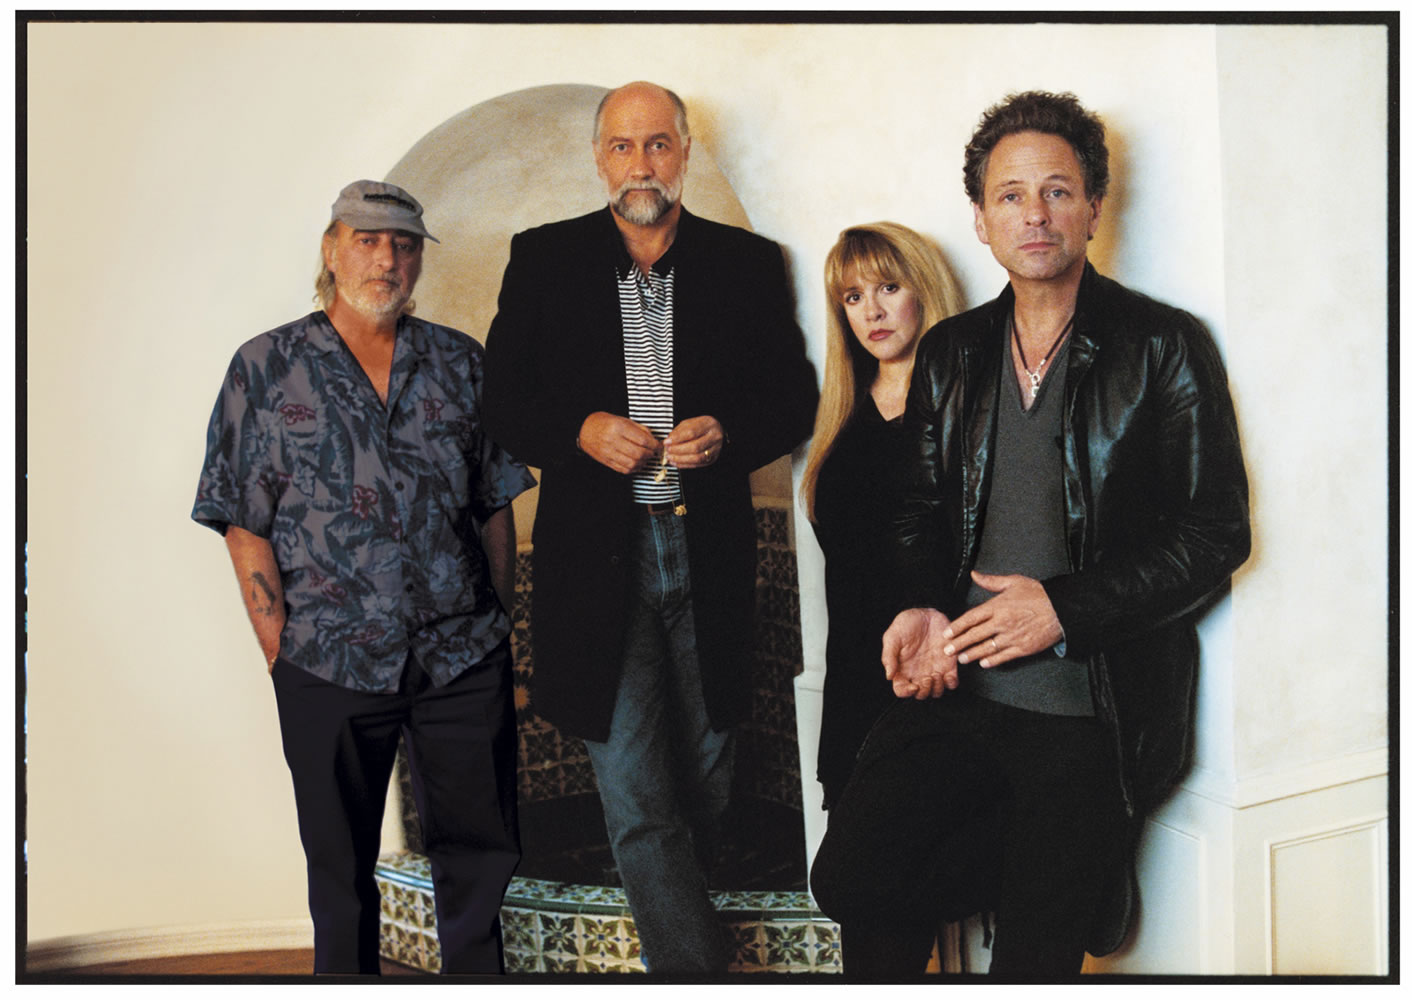 Fleetwood Mac will perform June 30 at the Rose Garden in Portland.